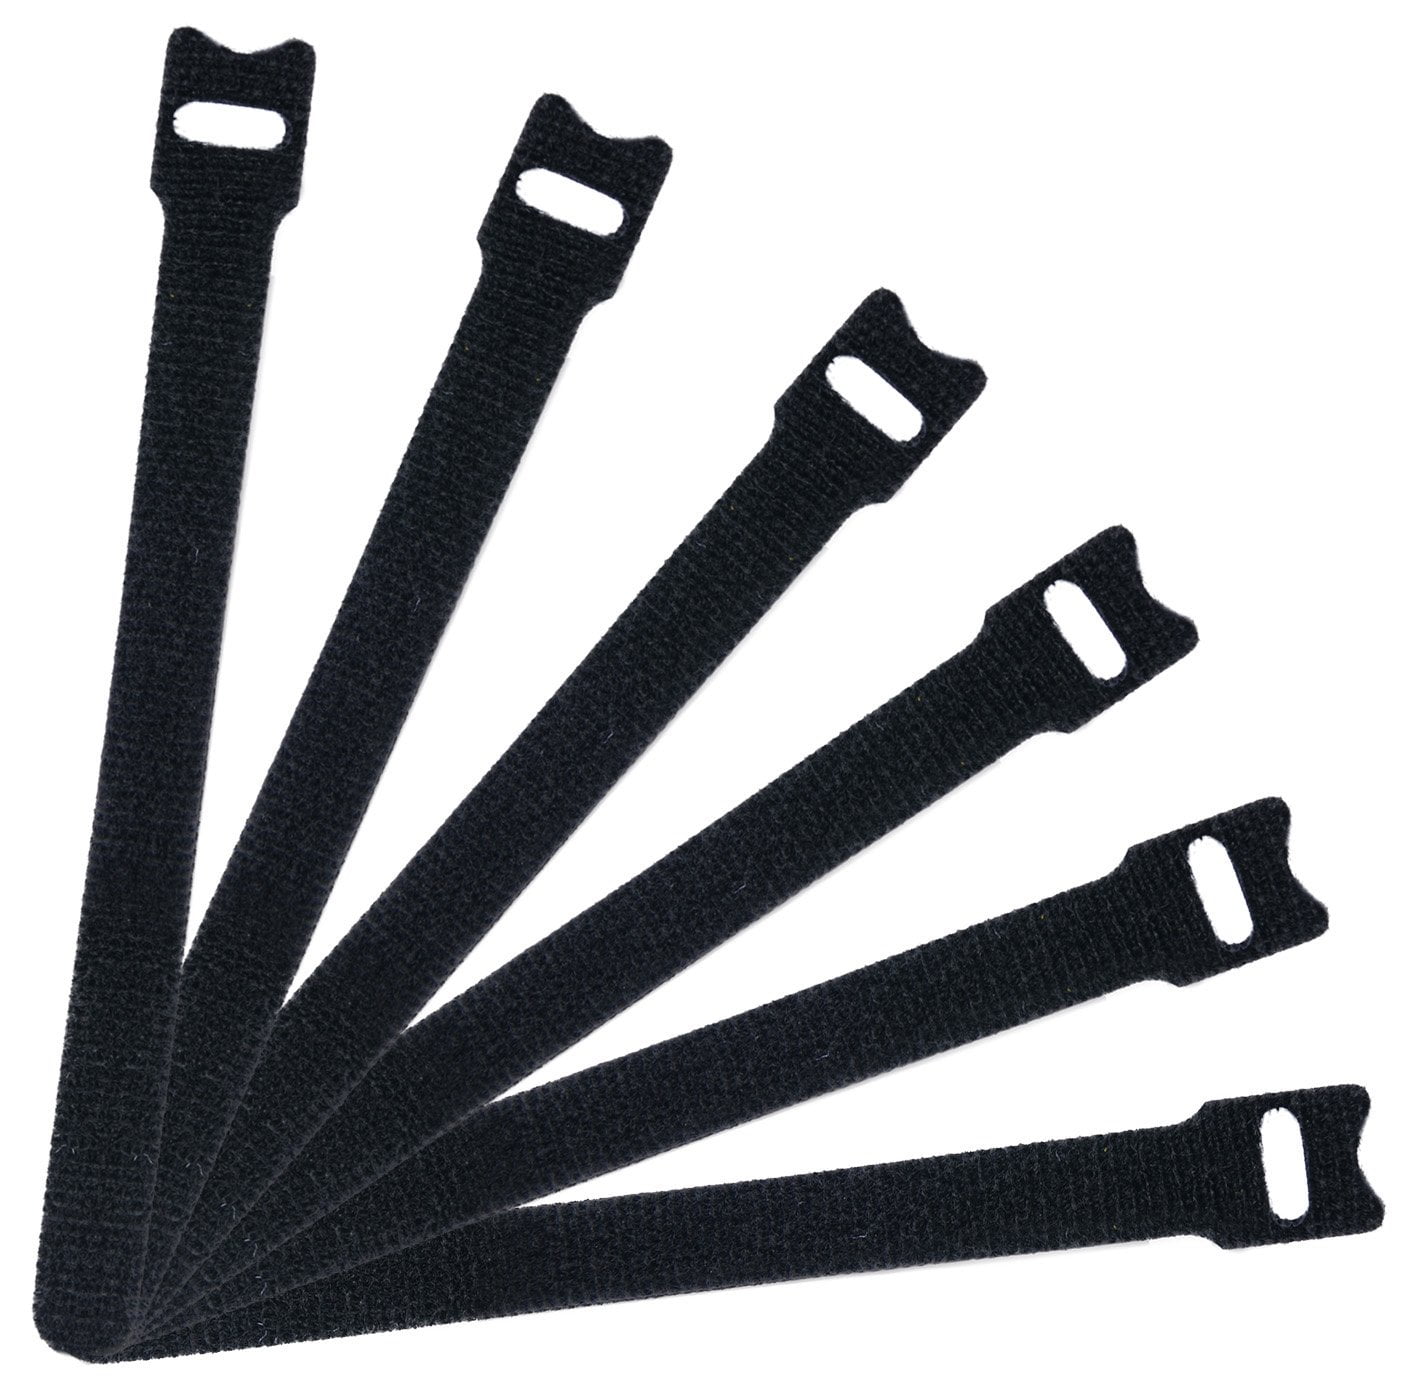 6 Inch Hook and Loop Reusable Strap Cable Cord Wire Ties 50 Pack Black 